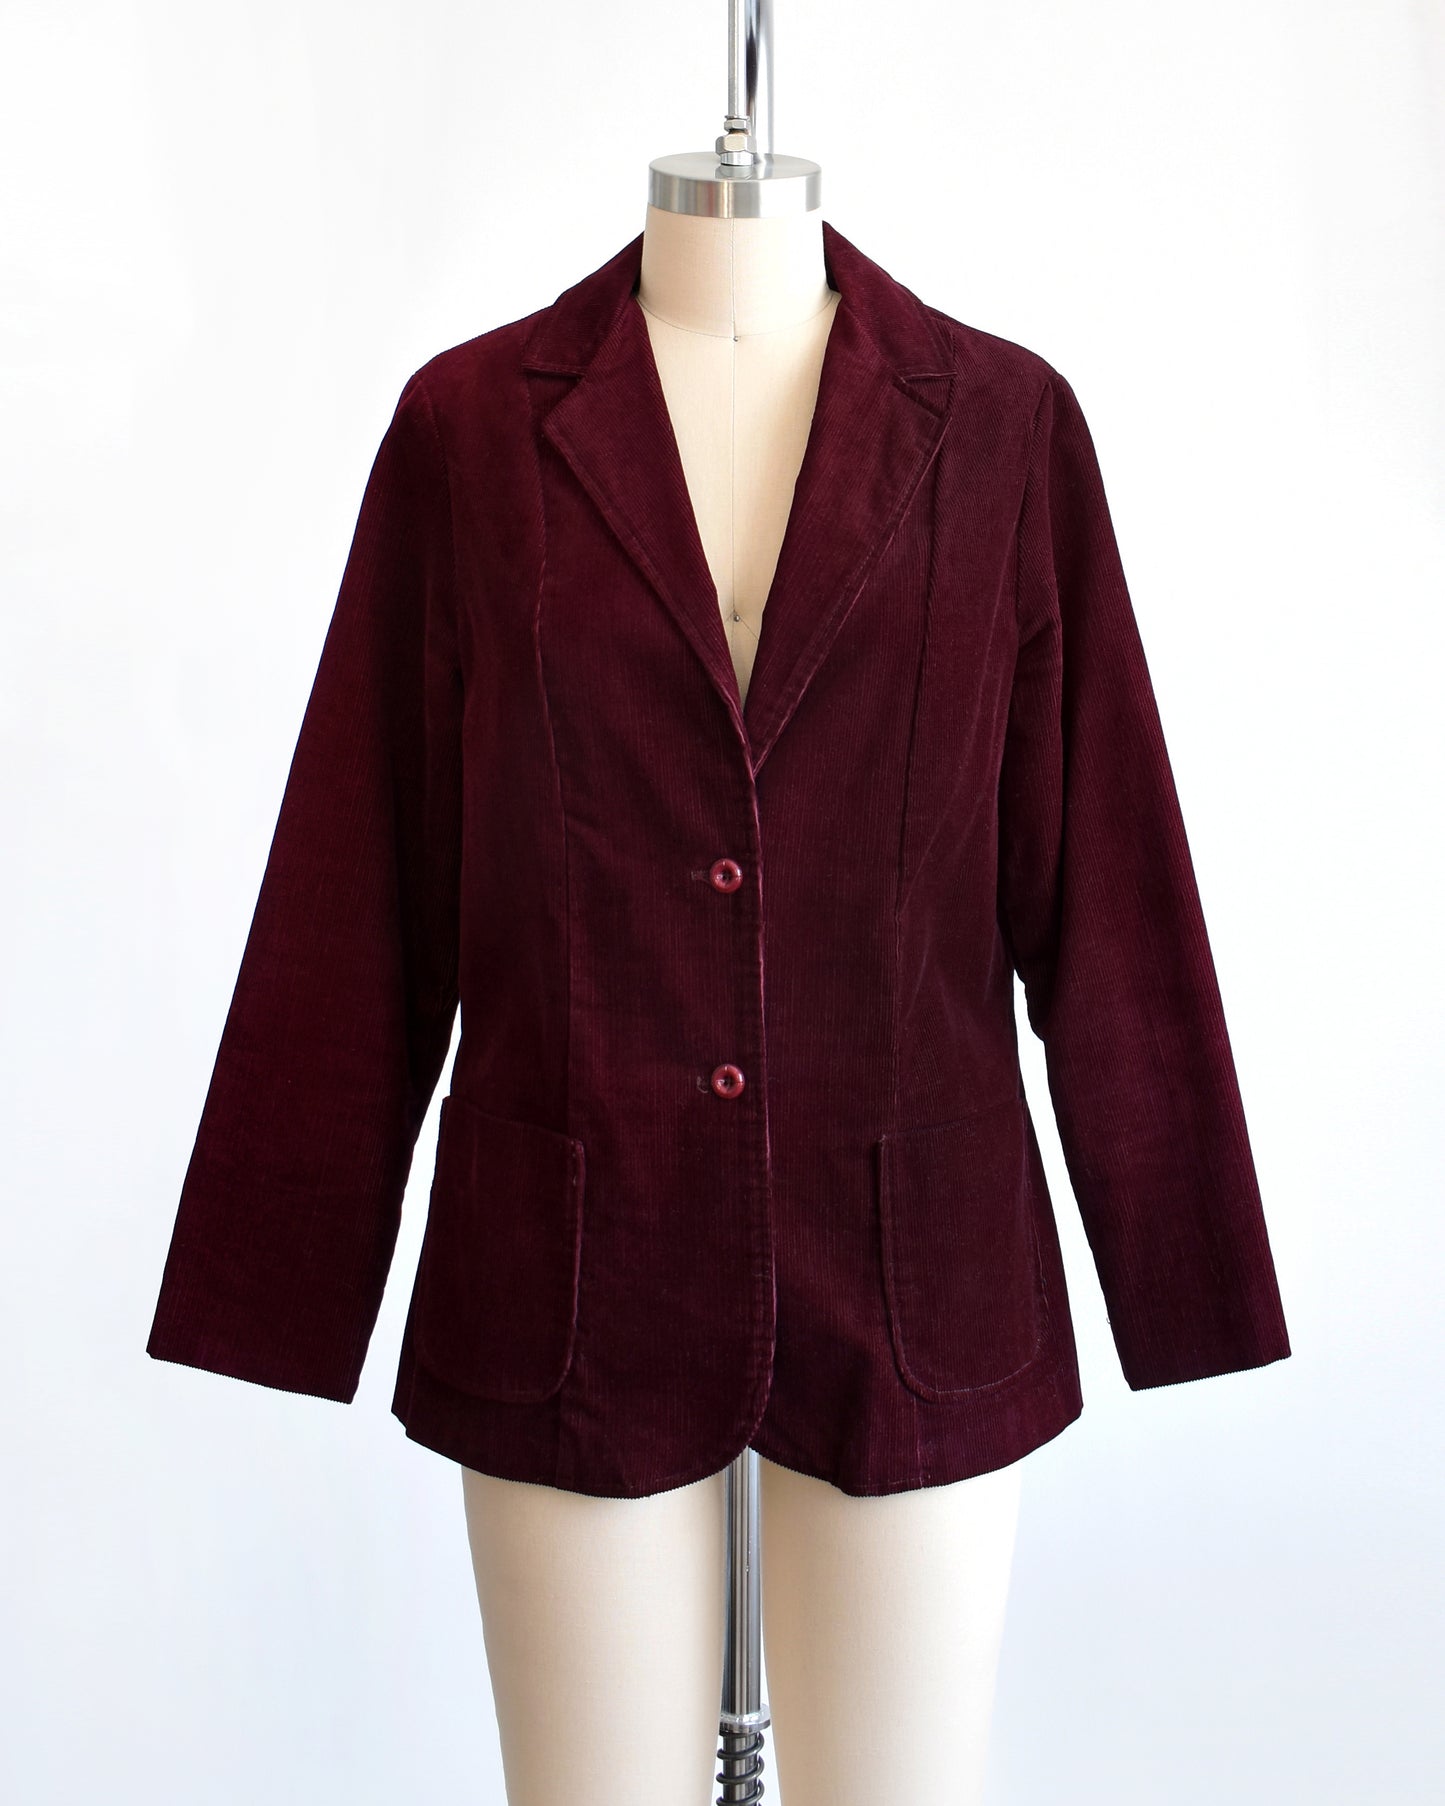 A vintage 1980s burgundy corduroy blazer that features two plastic buttons on the front and two front patch pockets on each side.